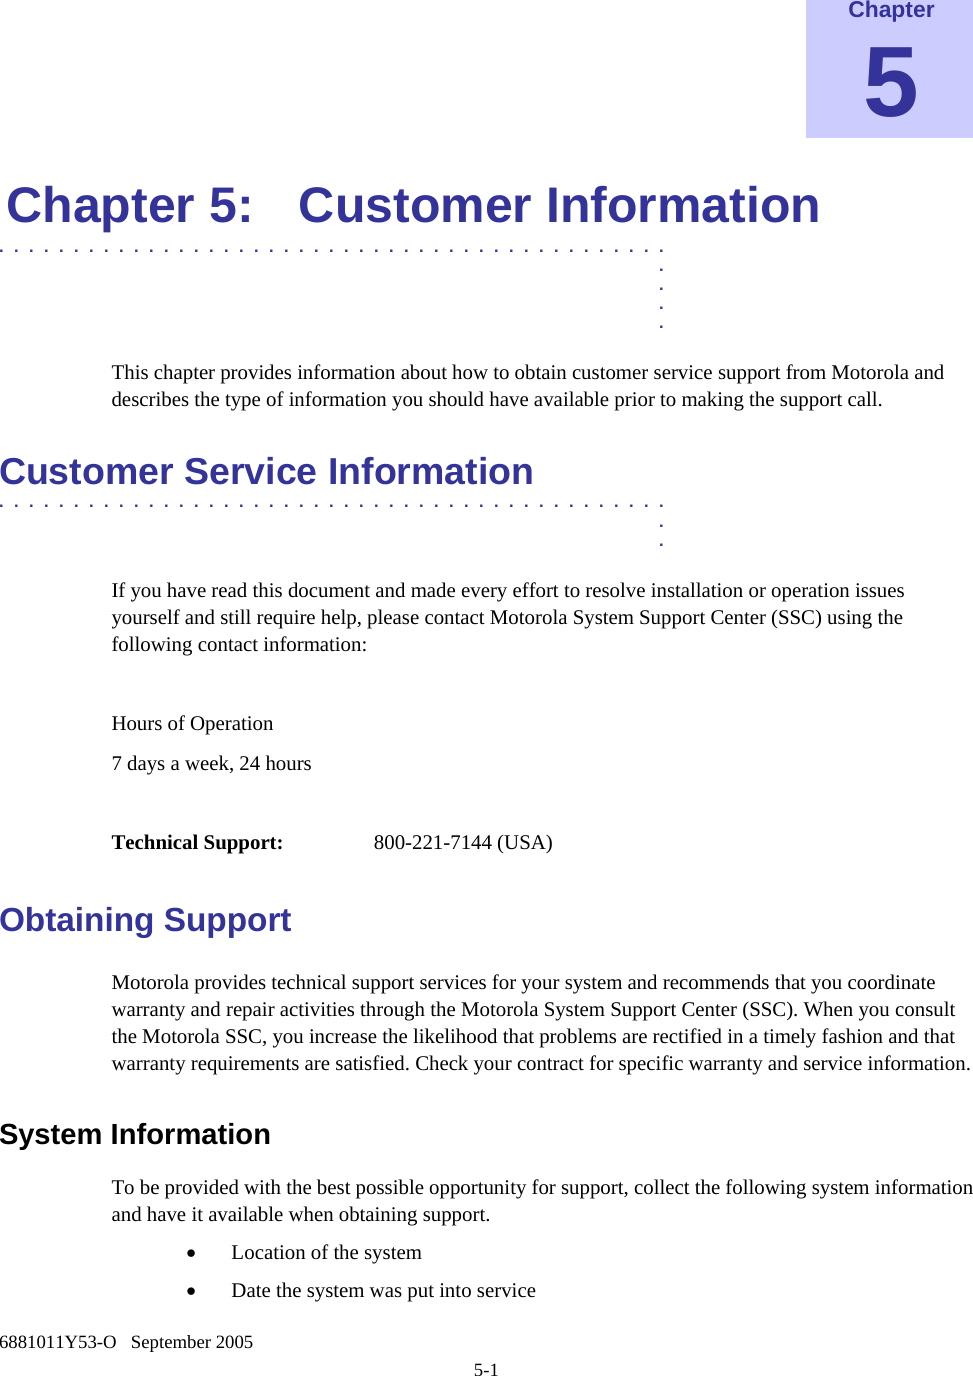    6881011Y53-O   September 2005 5-1  Chapter 5 Chapter 5:  Customer Information .............................................  .  .  .  . This chapter provides information about how to obtain customer service support from Motorola and describes the type of information you should have available prior to making the support call. Customer Service Information .............................................  .  . If you have read this document and made every effort to resolve installation or operation issues yourself and still require help, please contact Motorola System Support Center (SSC) using the following contact information:  Hours of Operation 7 days a week, 24 hours  Technical Support:   800-221-7144 (USA) Obtaining Support Motorola provides technical support services for your system and recommends that you coordinate warranty and repair activities through the Motorola System Support Center (SSC). When you consult the Motorola SSC, you increase the likelihood that problems are rectified in a timely fashion and that warranty requirements are satisfied. Check your contract for specific warranty and service information. System Information  To be provided with the best possible opportunity for support, collect the following system information and have it available when obtaining support. • Location of the system • Date the system was put into service 